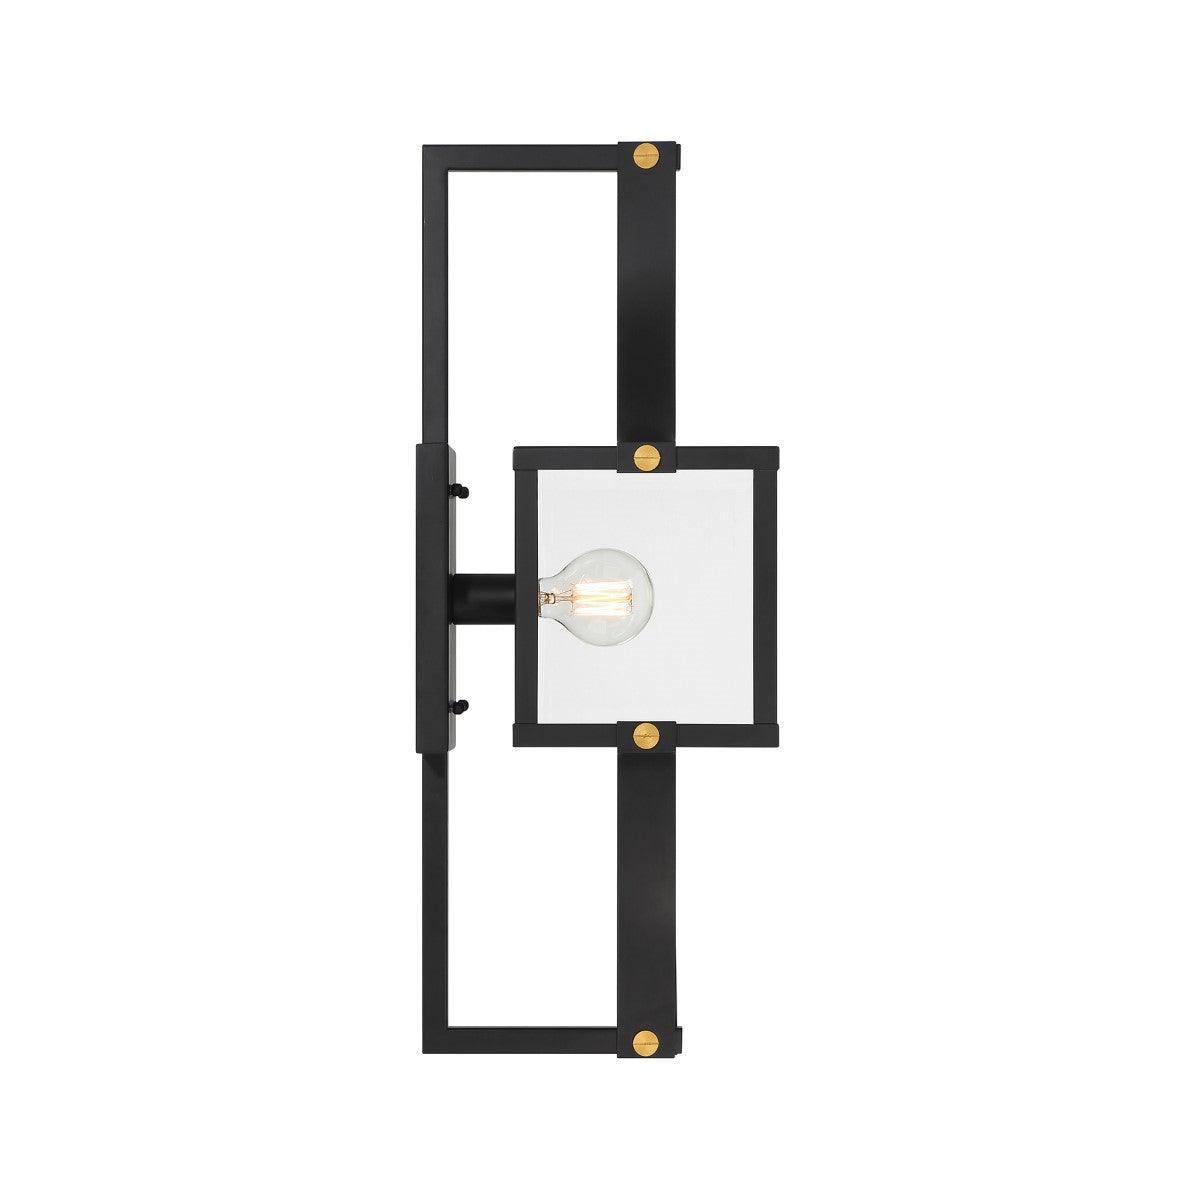 Raeburn 28 in. Outdoor Wall Lantern Matte Black and Weathered Brushed Brass Finish